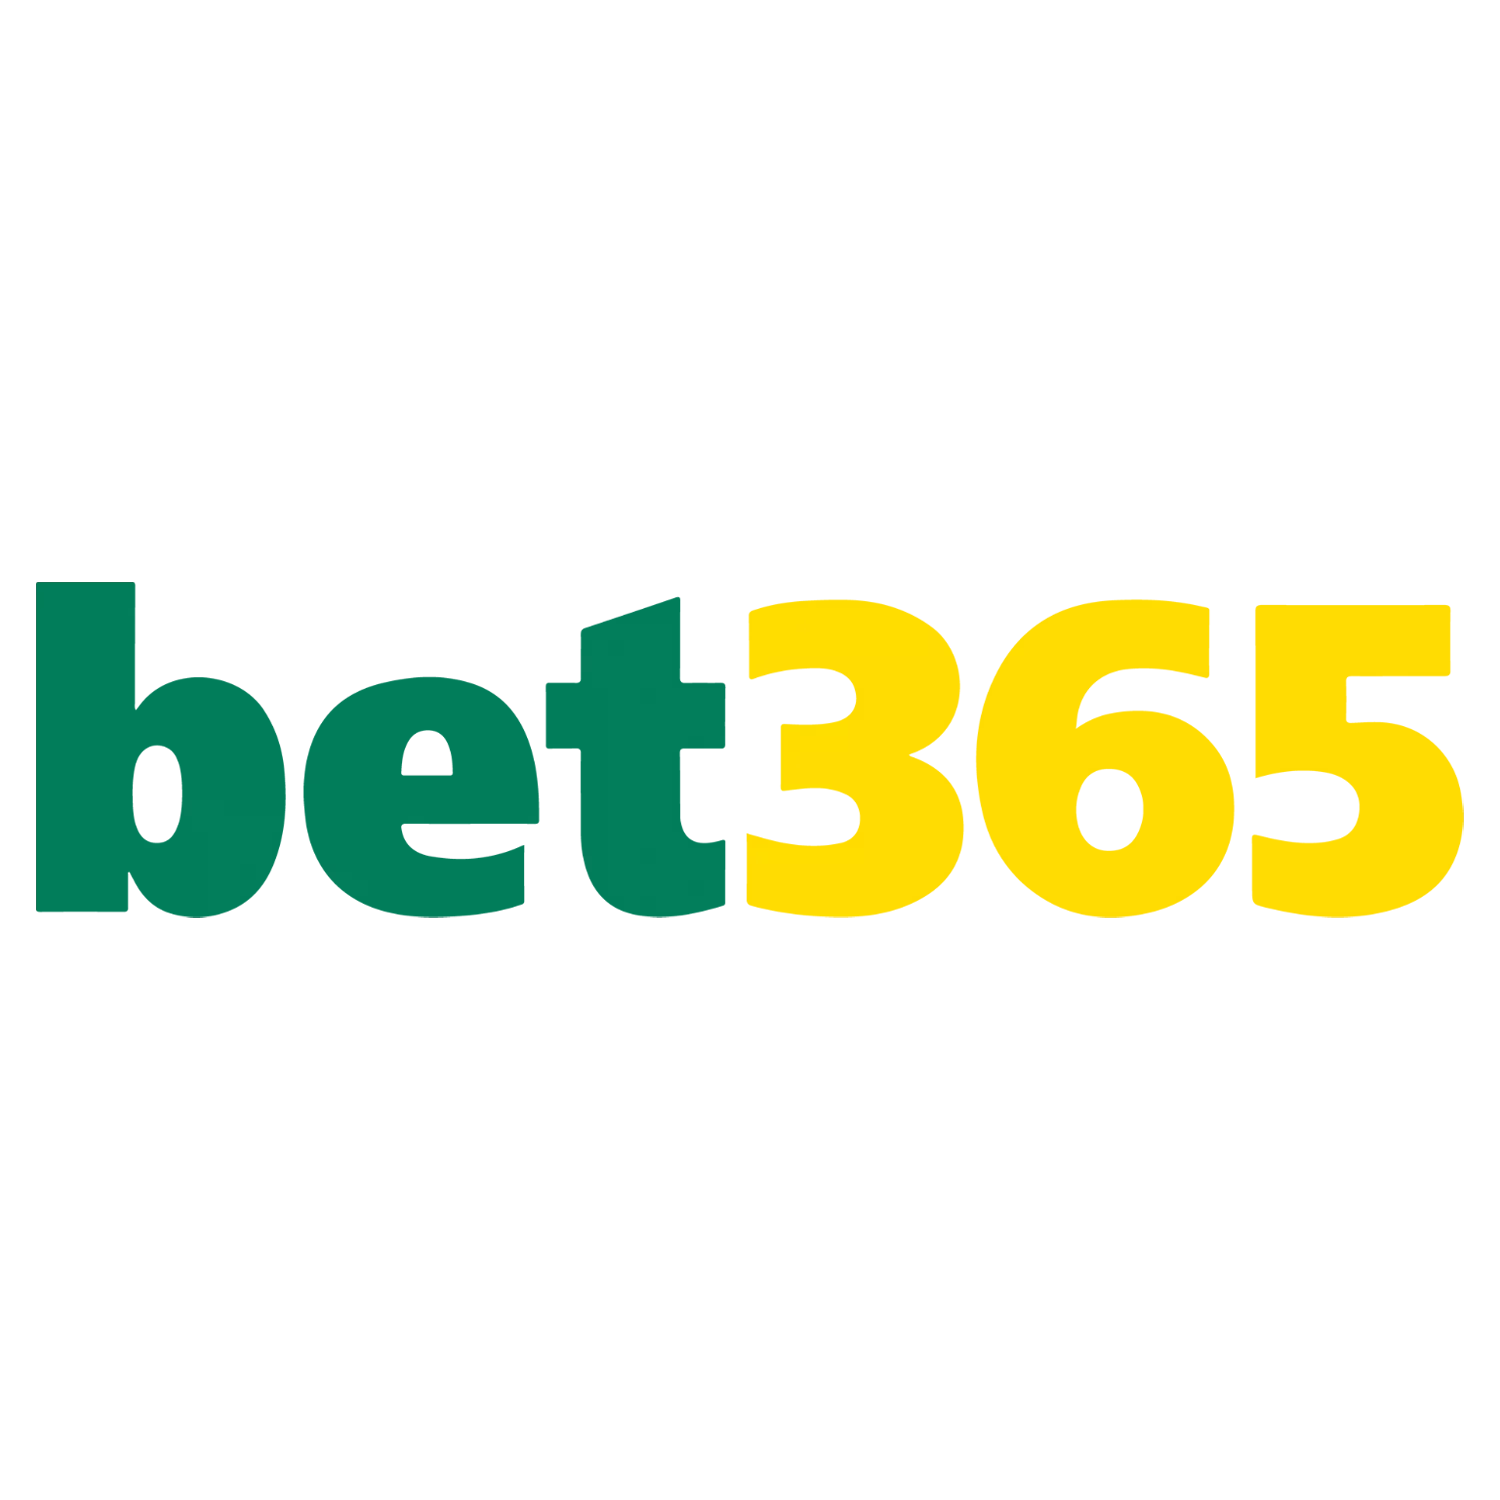 Bet365 is one of the top ten online betting sites in Bangladesh by Bettingonlinebd.